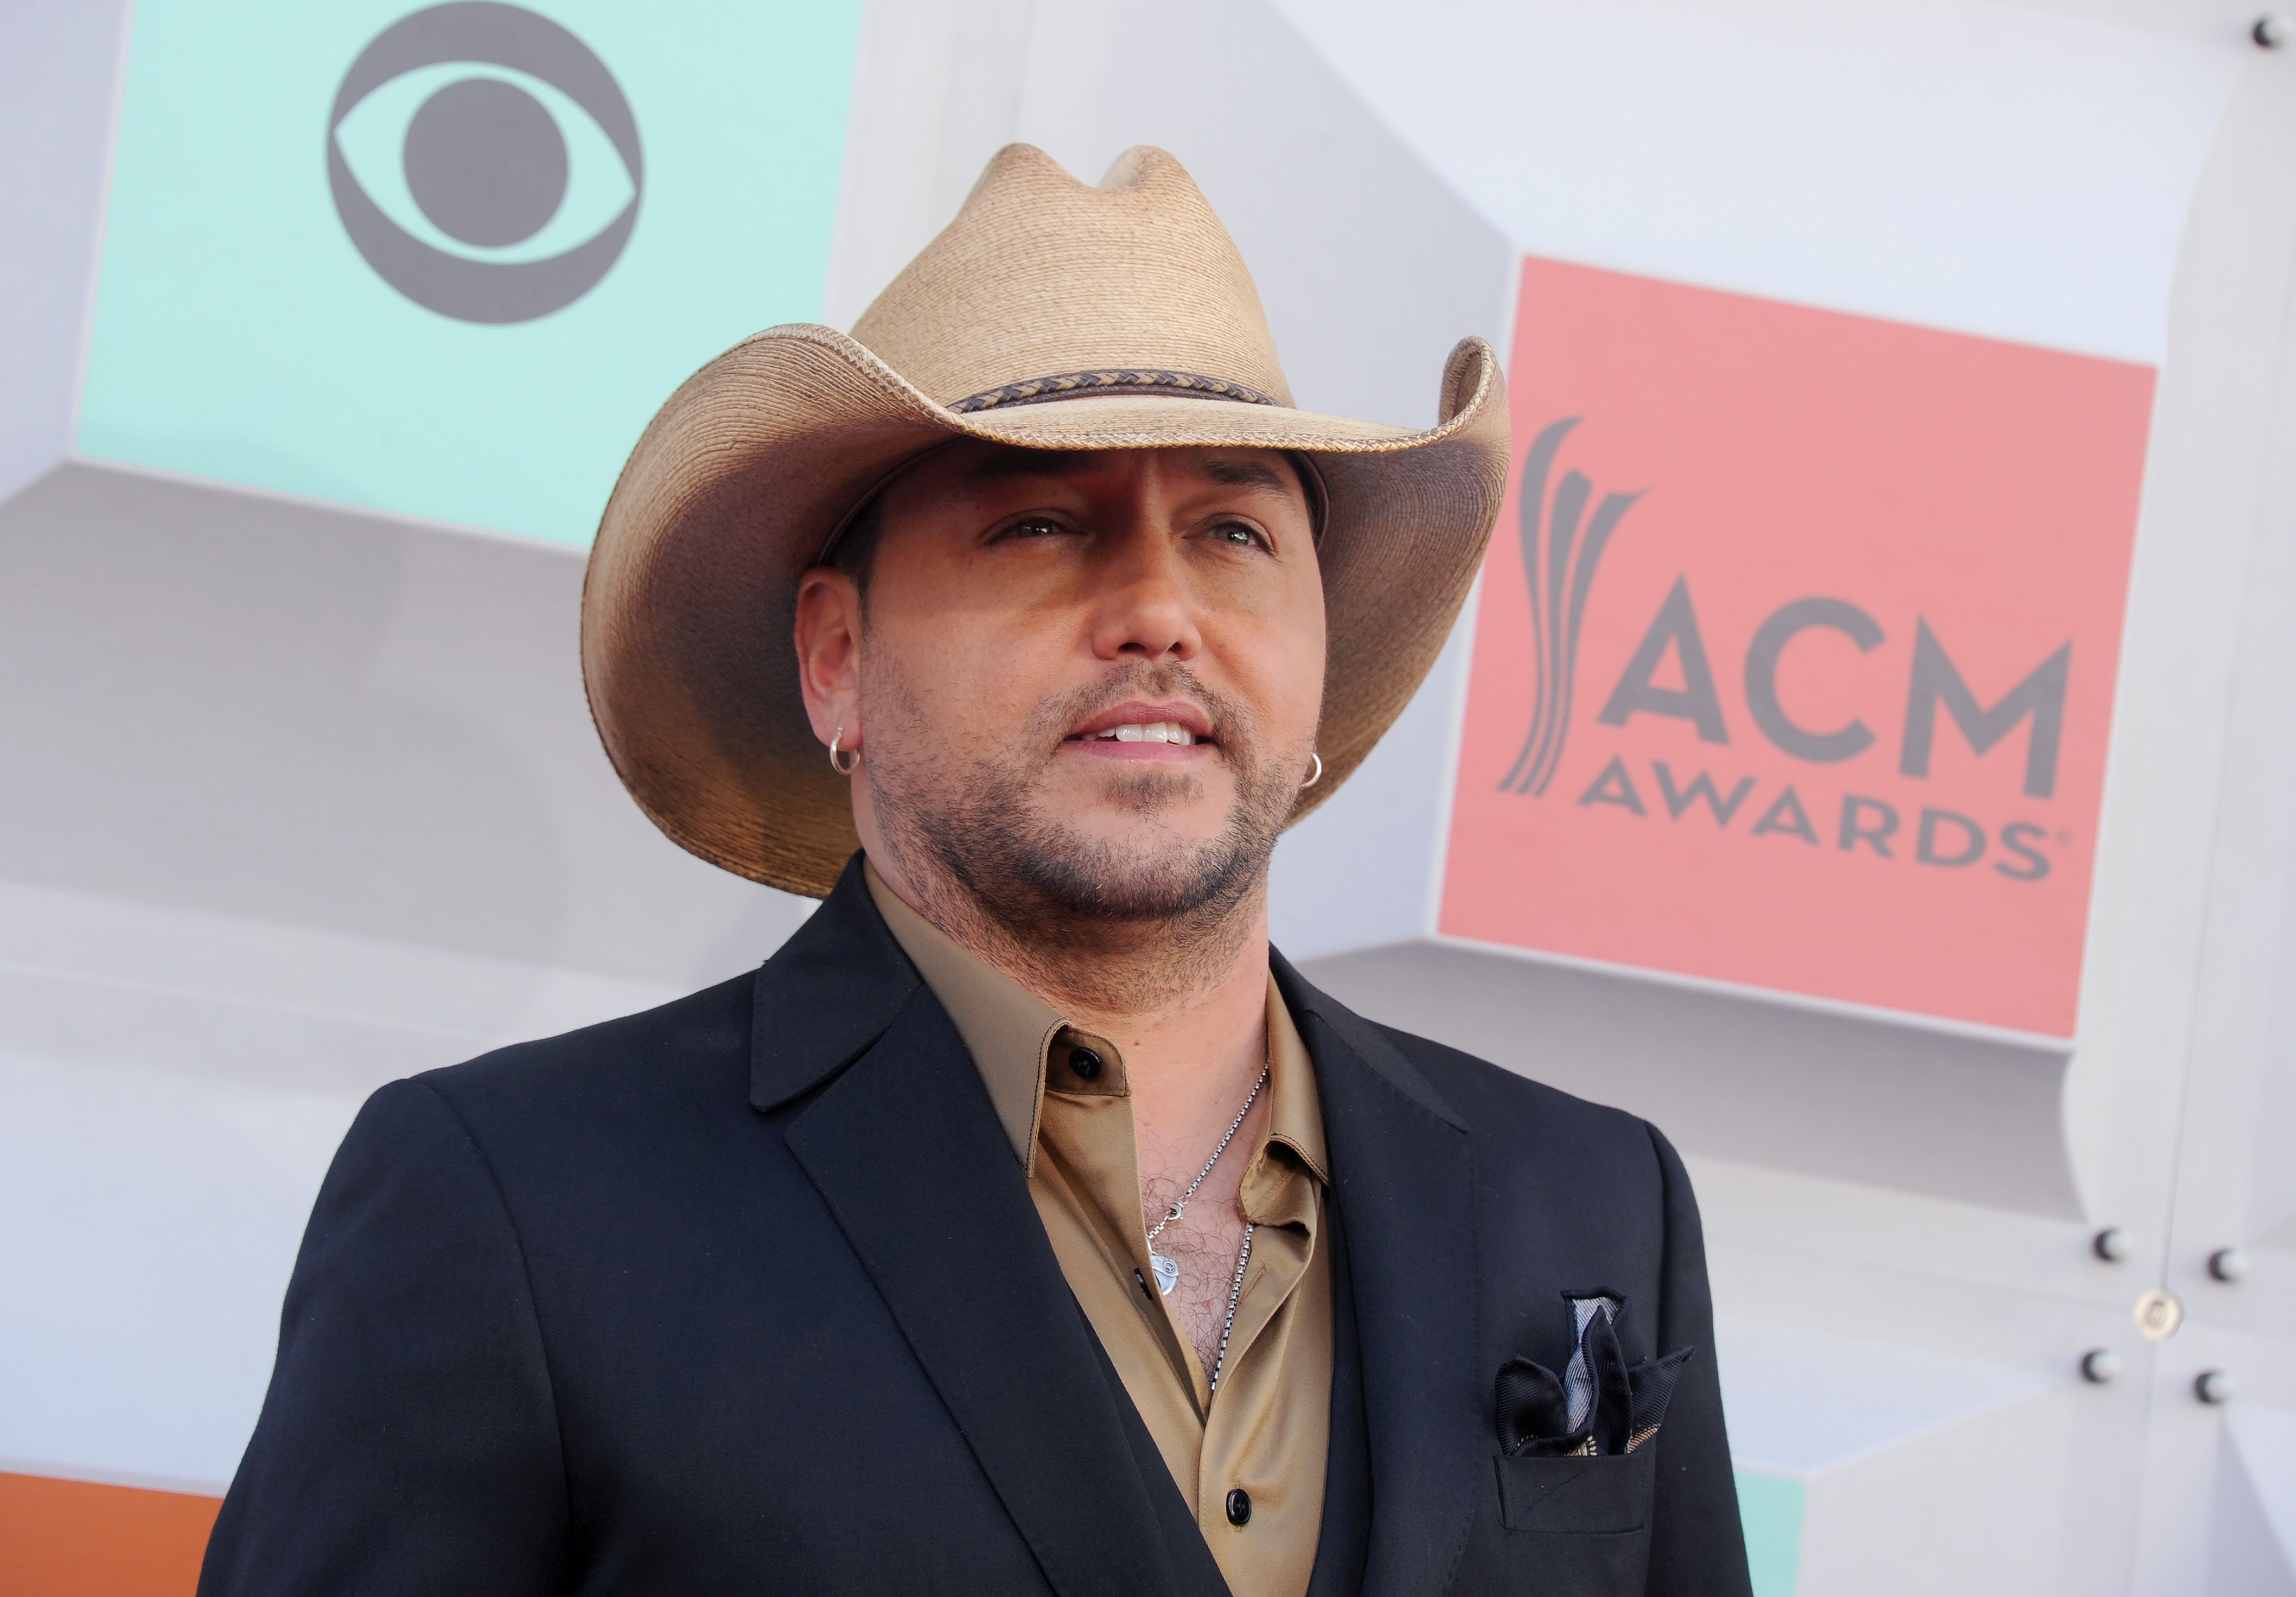 Jason Aldean at the 51st Academy Of Country Music Awards at MGM Grand Garden Arena on April 3, 2016 in Las Vegas, Nevada. | Source: Getty Images